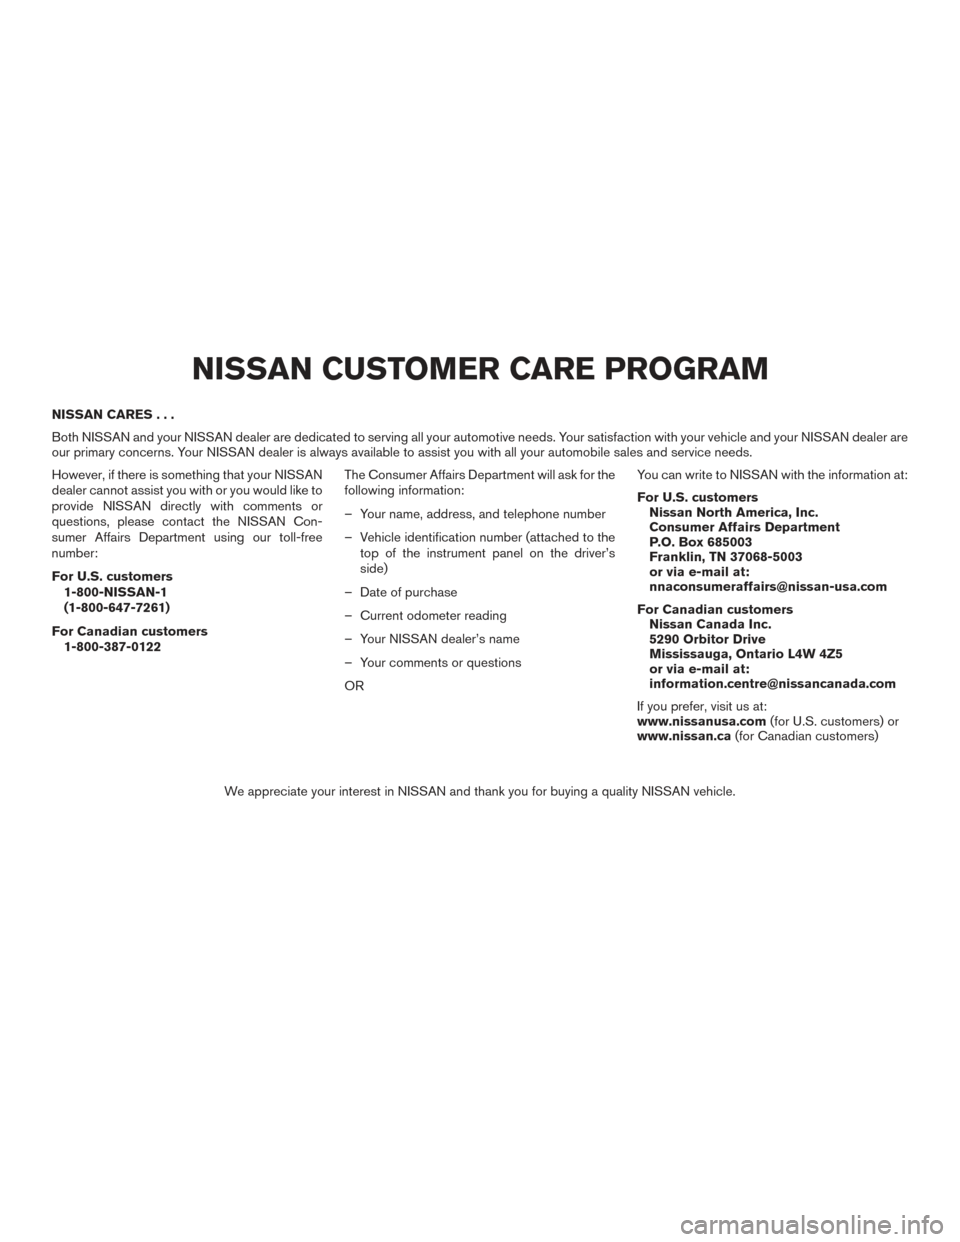 NISSAN SENTRA 2015 B17 / 7.G Owners Manual NISSAN CARES...
Both NISSAN and your NISSAN dealer are dedicated to serving all your automotive needs. Your satisfaction with your vehicle and your NISSAN dealer are
our primary concerns. Your NISSAN 